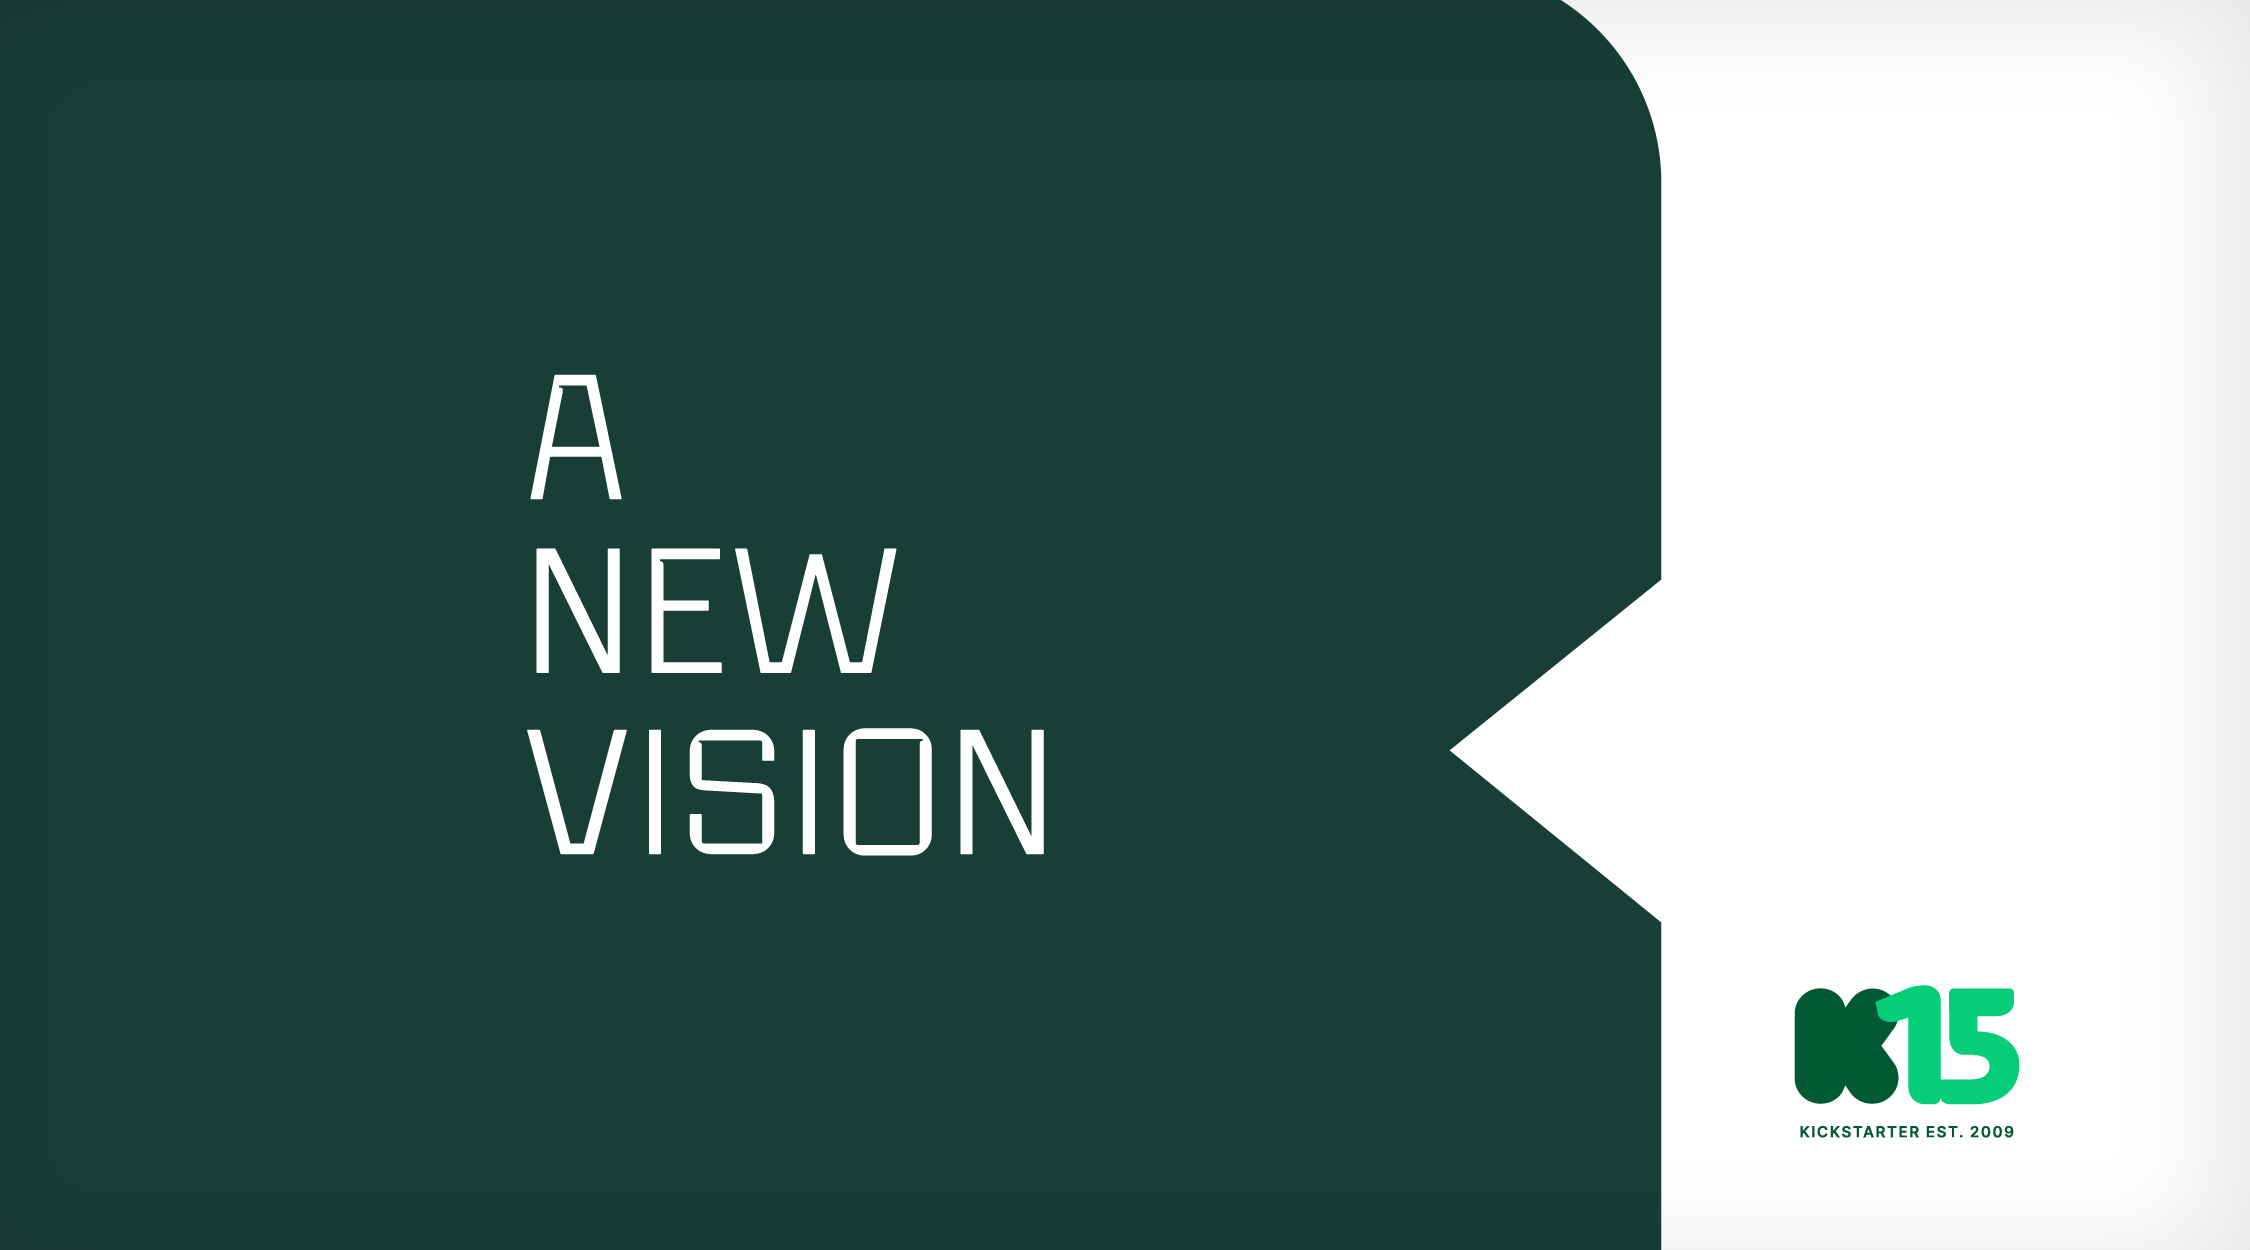 A new vision